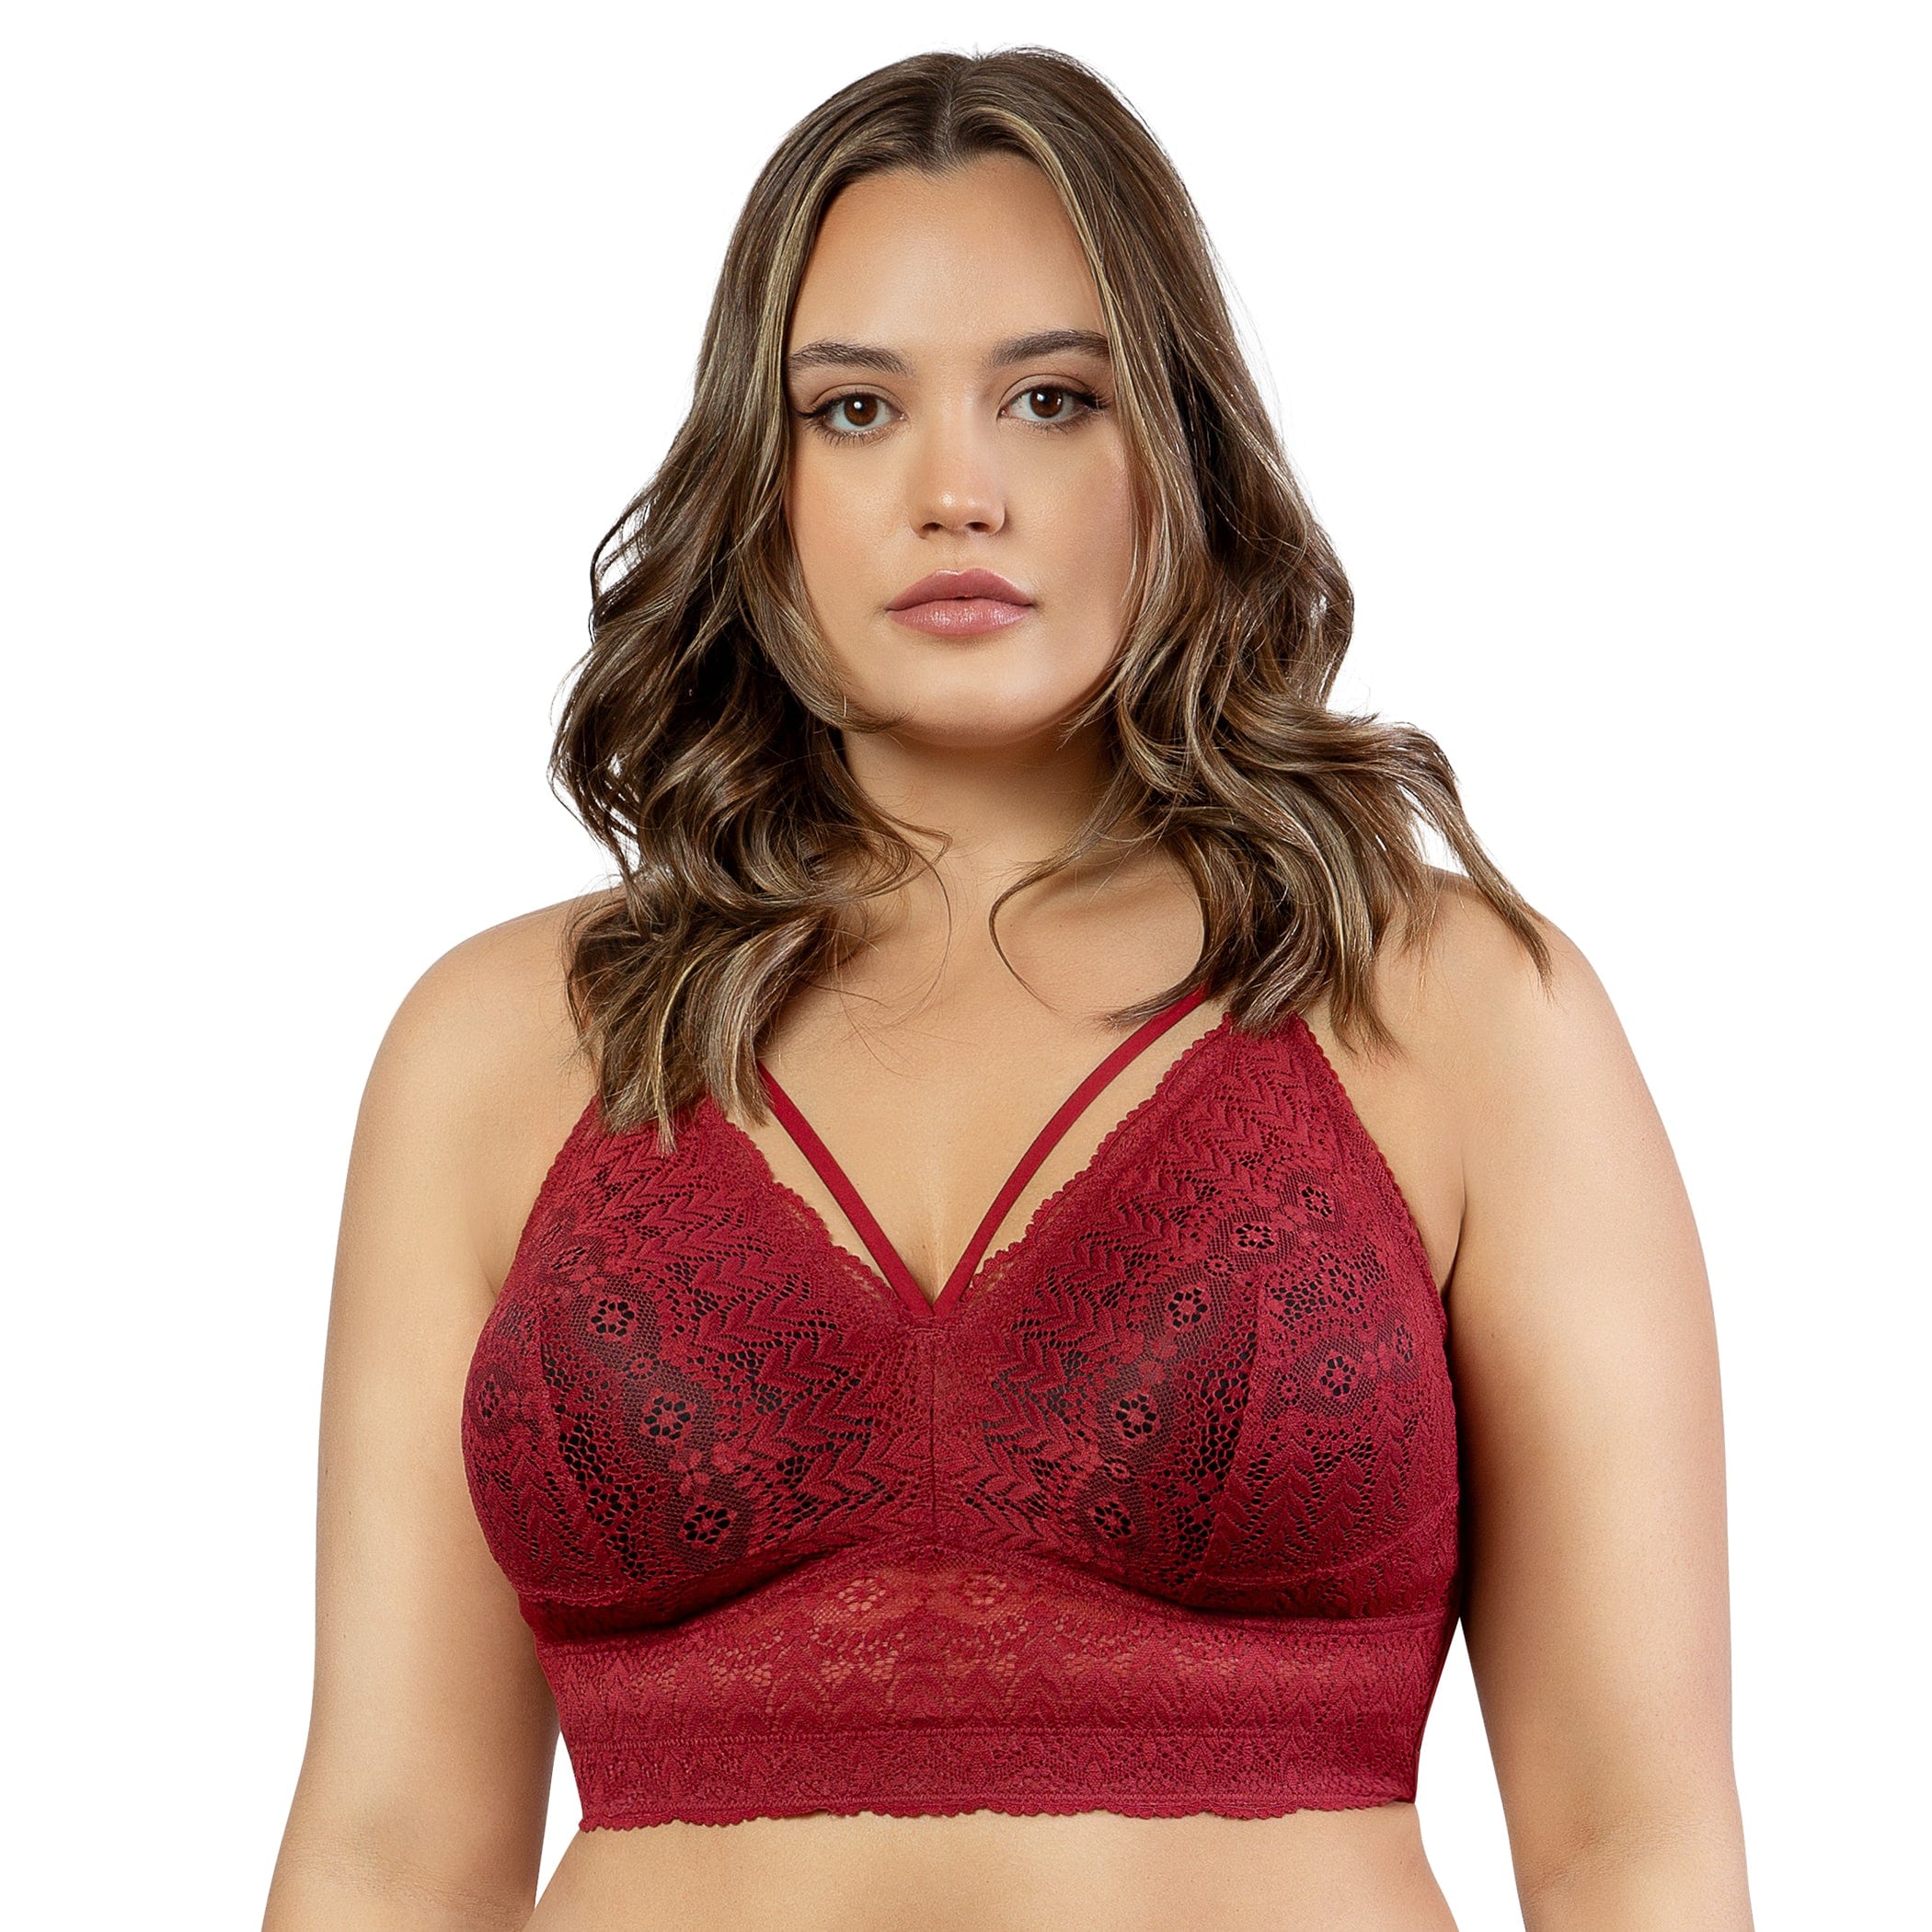 Red Cross Front Strap Lace Bra, Lingerie